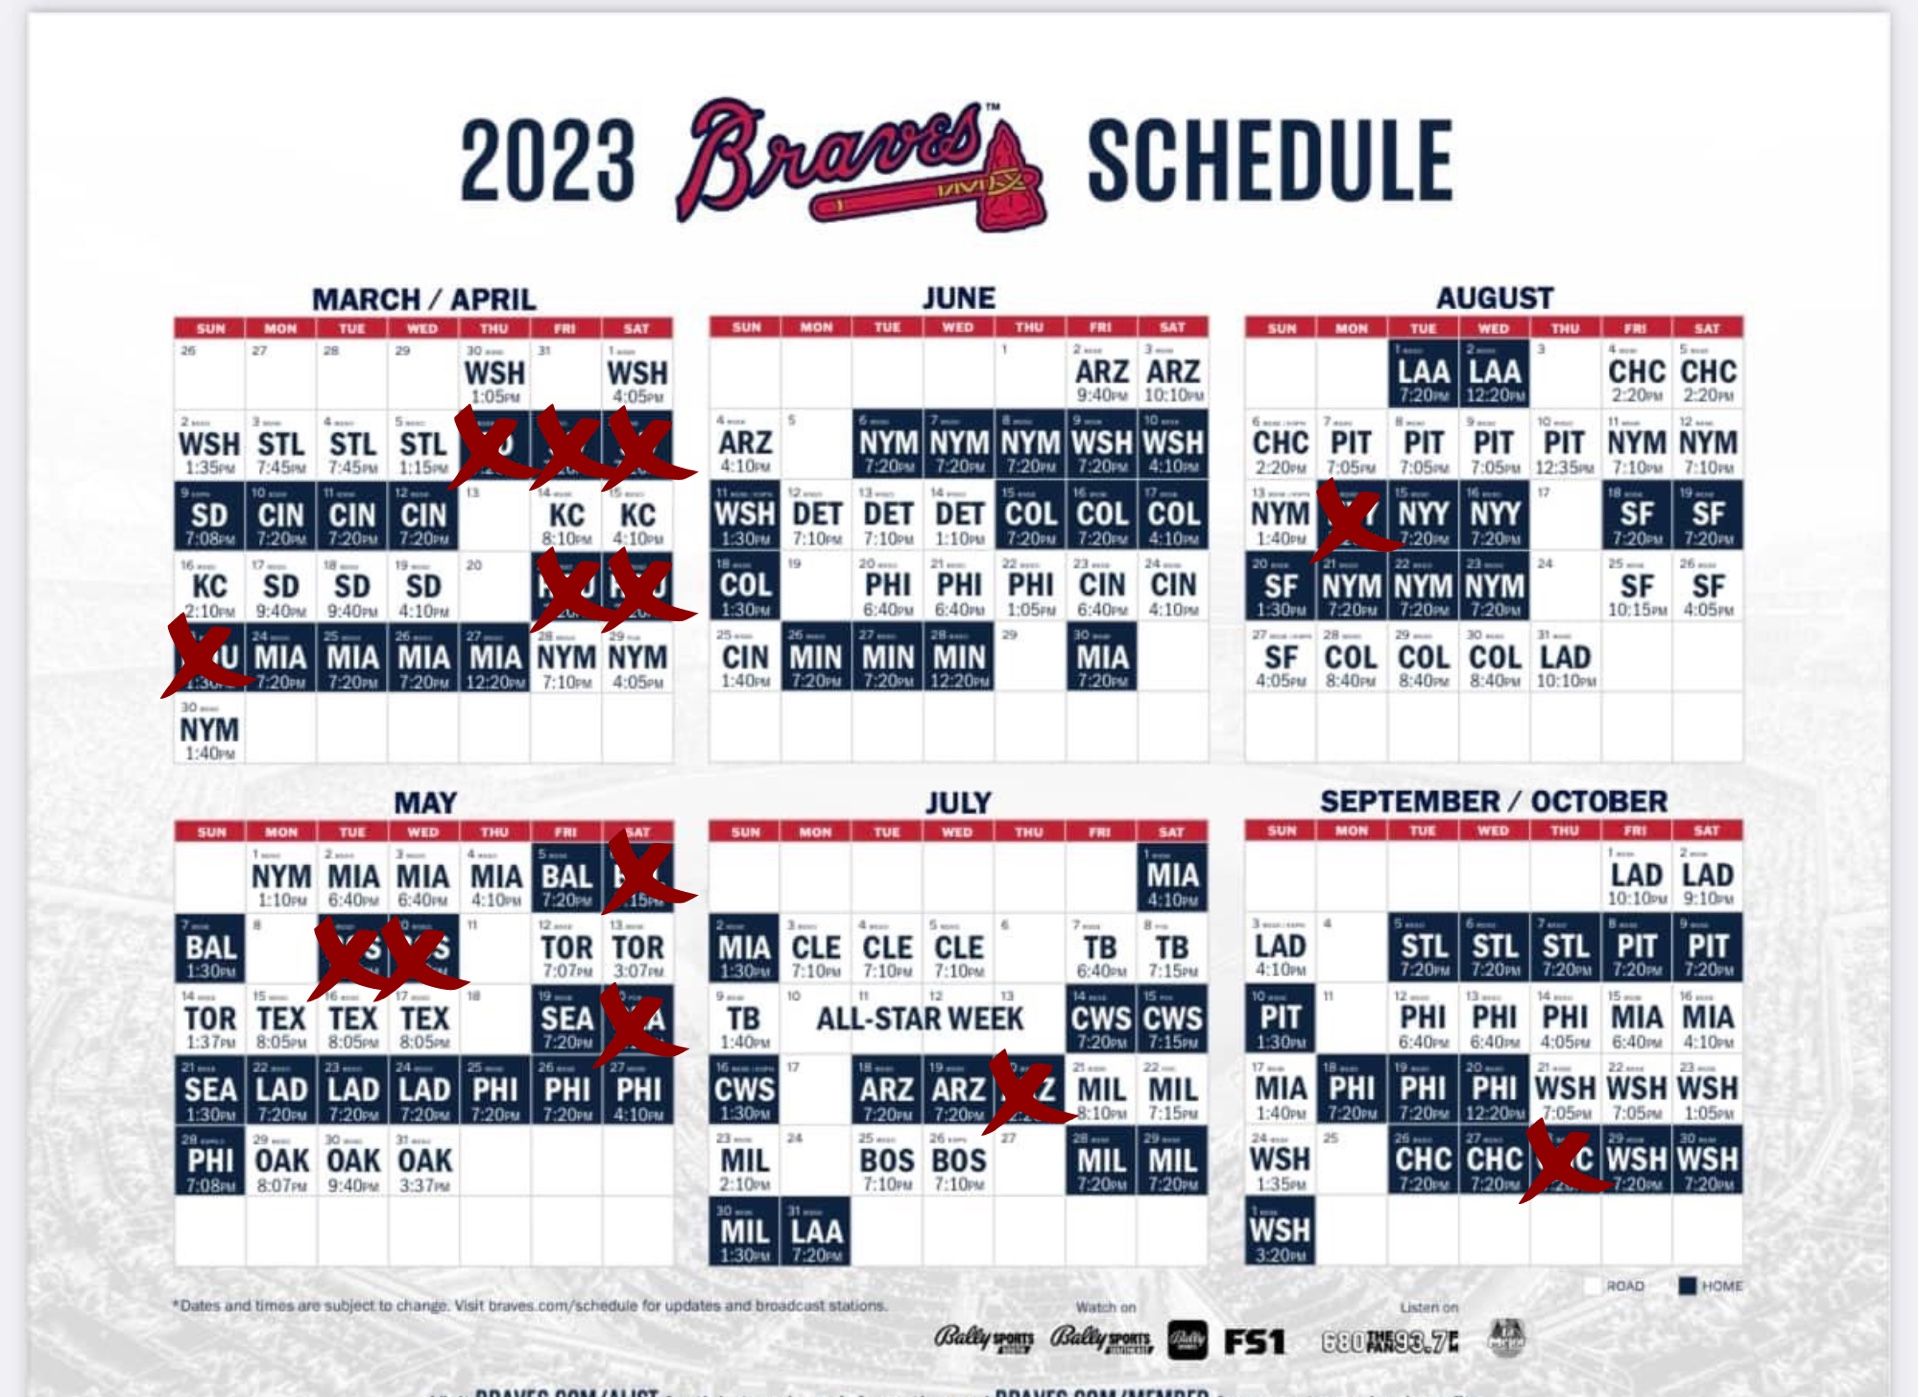 Braves Home games